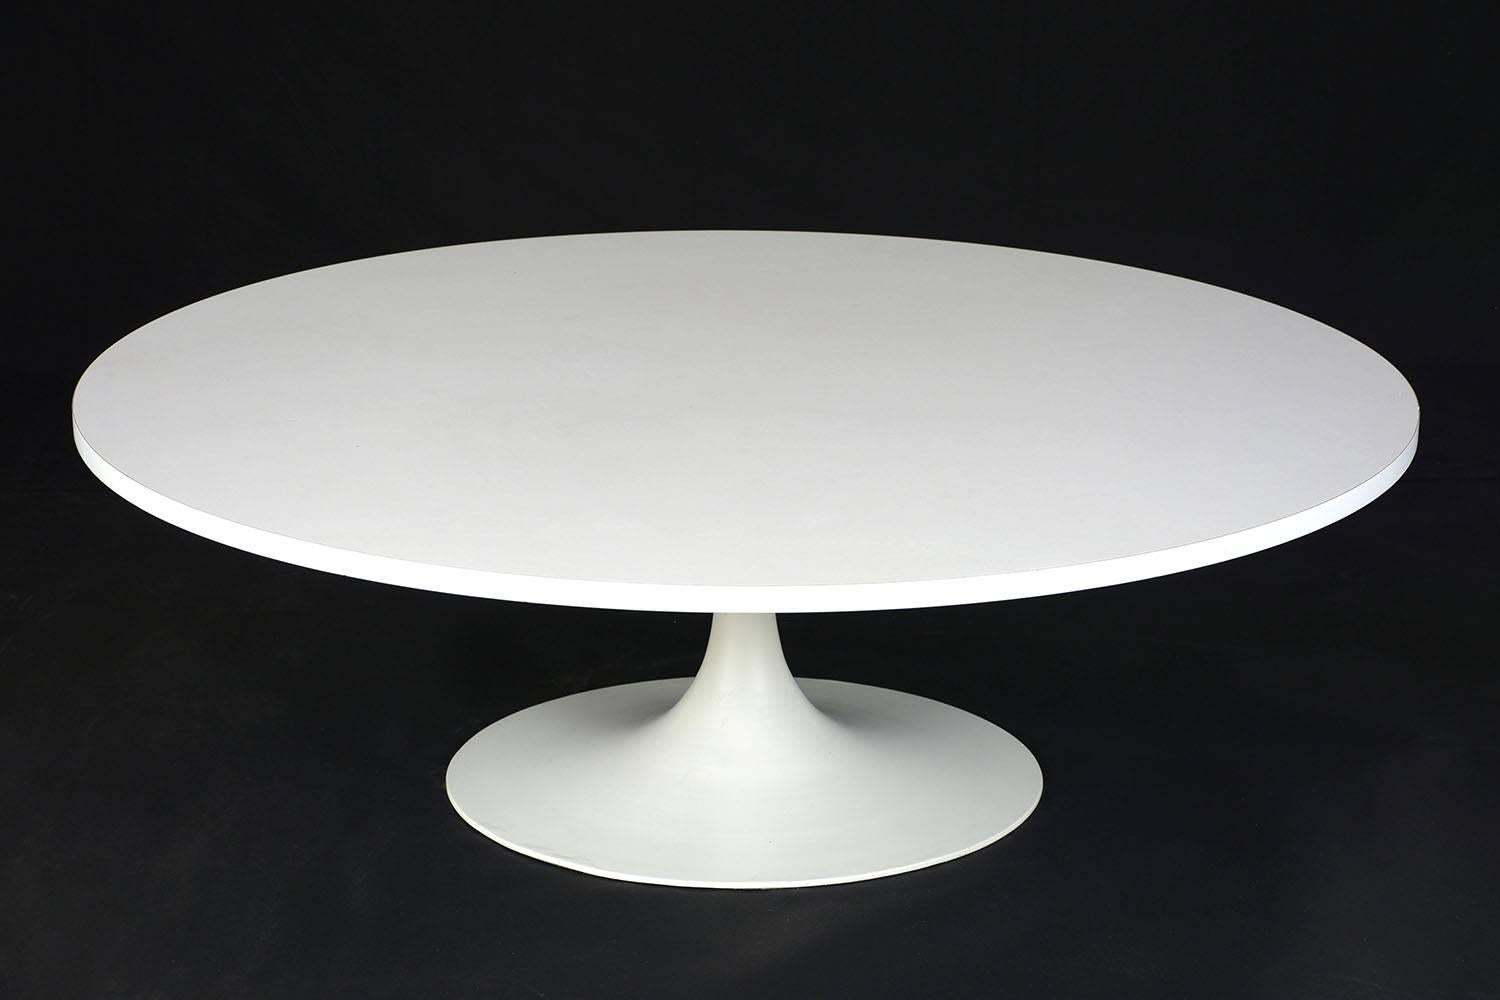 This 1960s Mid-Century Modern oval coffee table or cocktail table features a formica covered wood top with a metal base. The table is finished in a stark white color that will stand out in any room. This coffee table is sturdy, sleek, and ready to